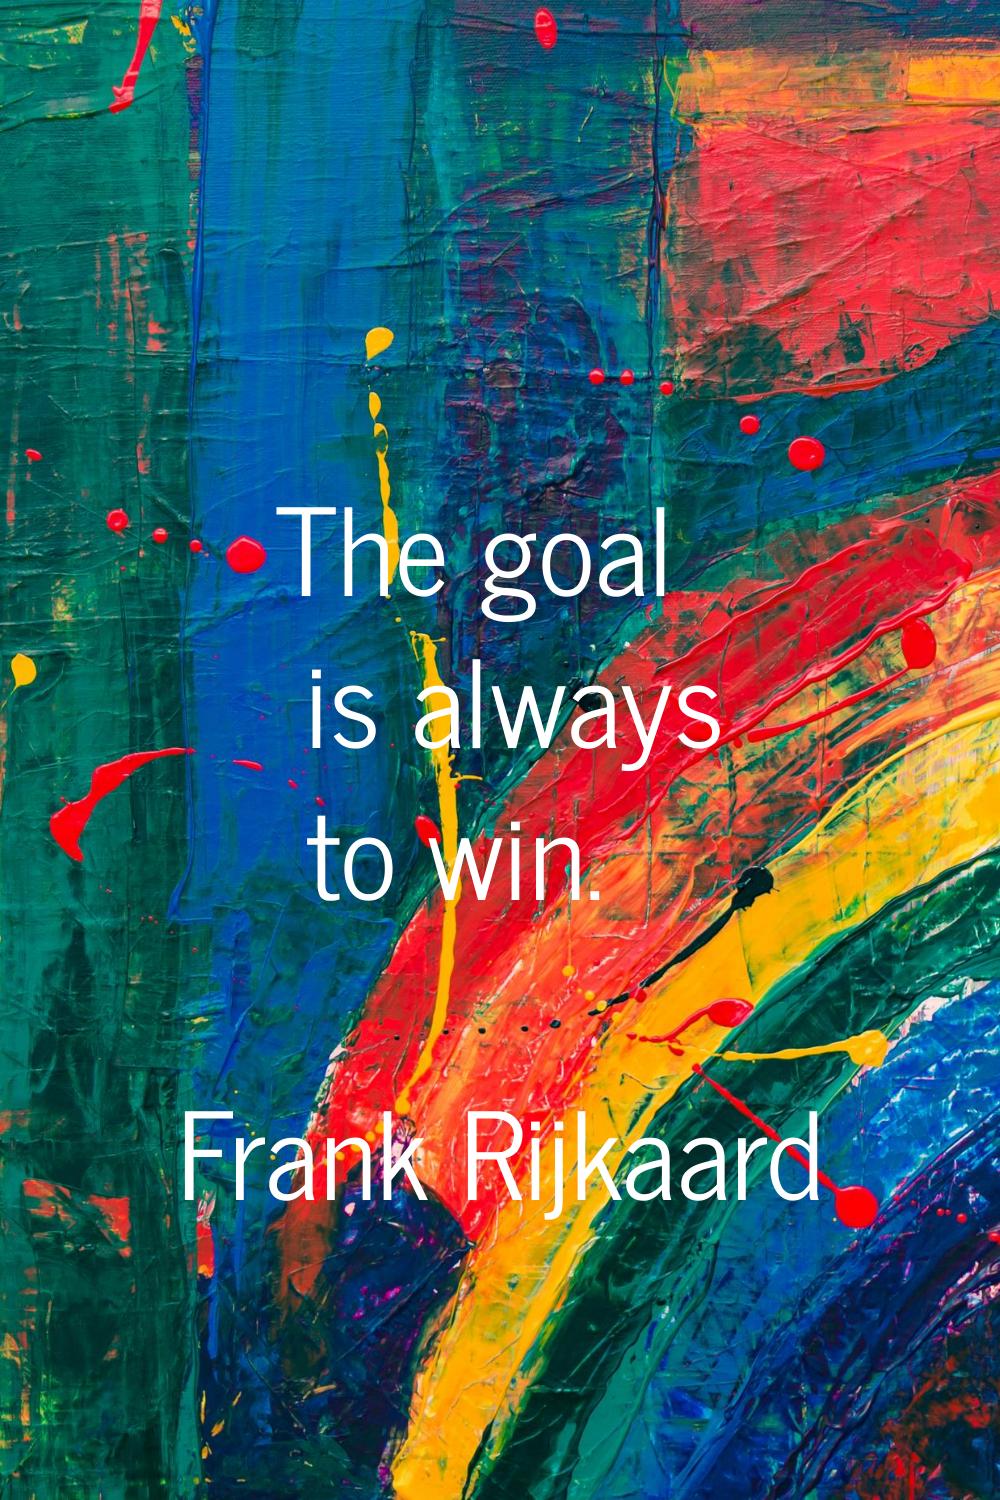 The goal is always to win.